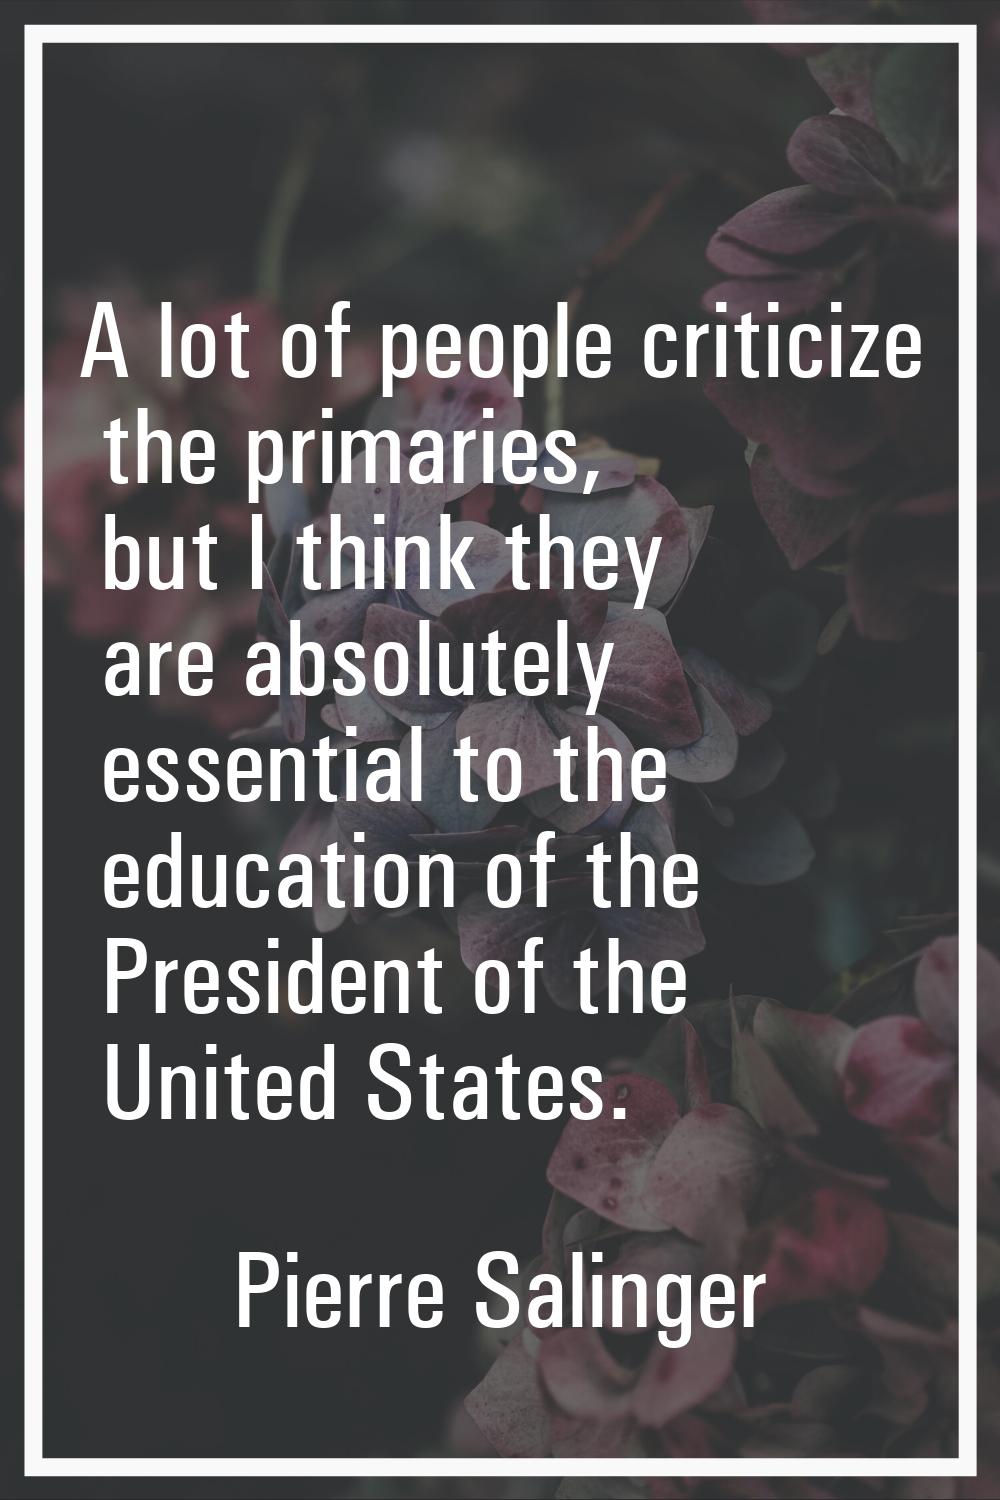 A lot of people criticize the primaries, but I think they are absolutely essential to the education